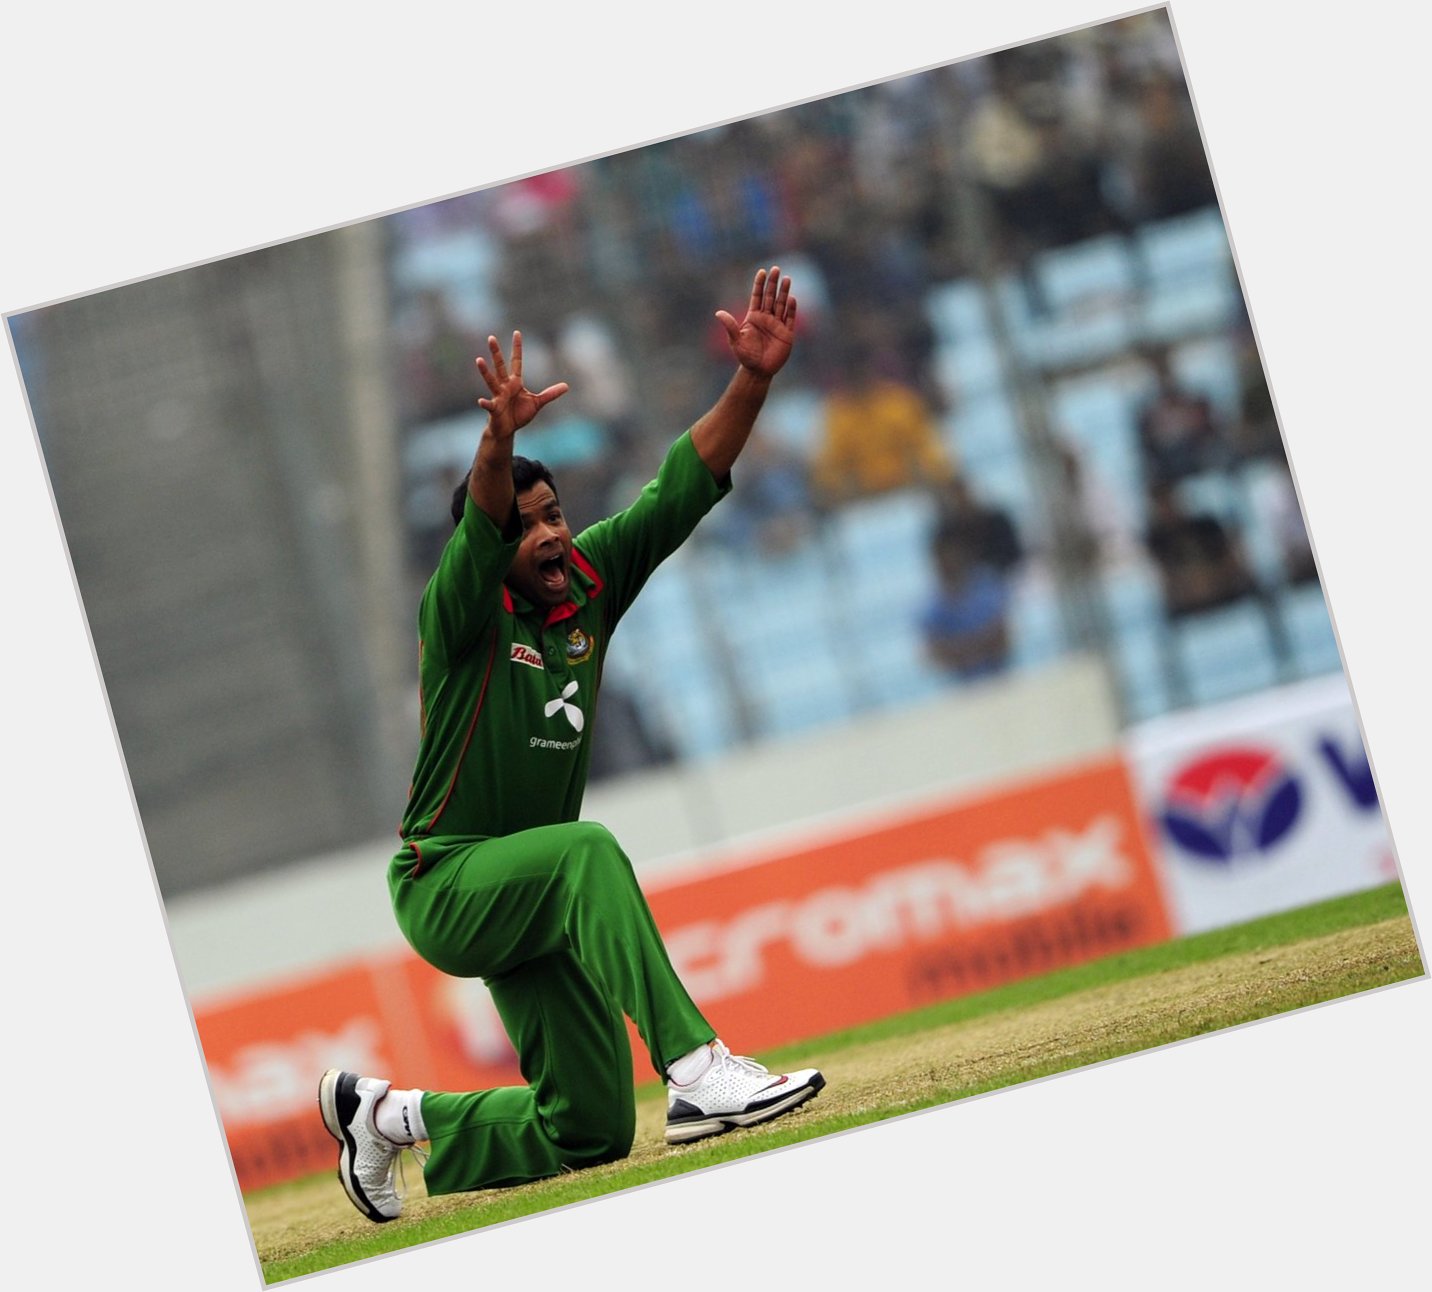 He was the first player to take 200 ODI wickets for Bangladesh - happy 36th birthday to Abdur Razzak! 